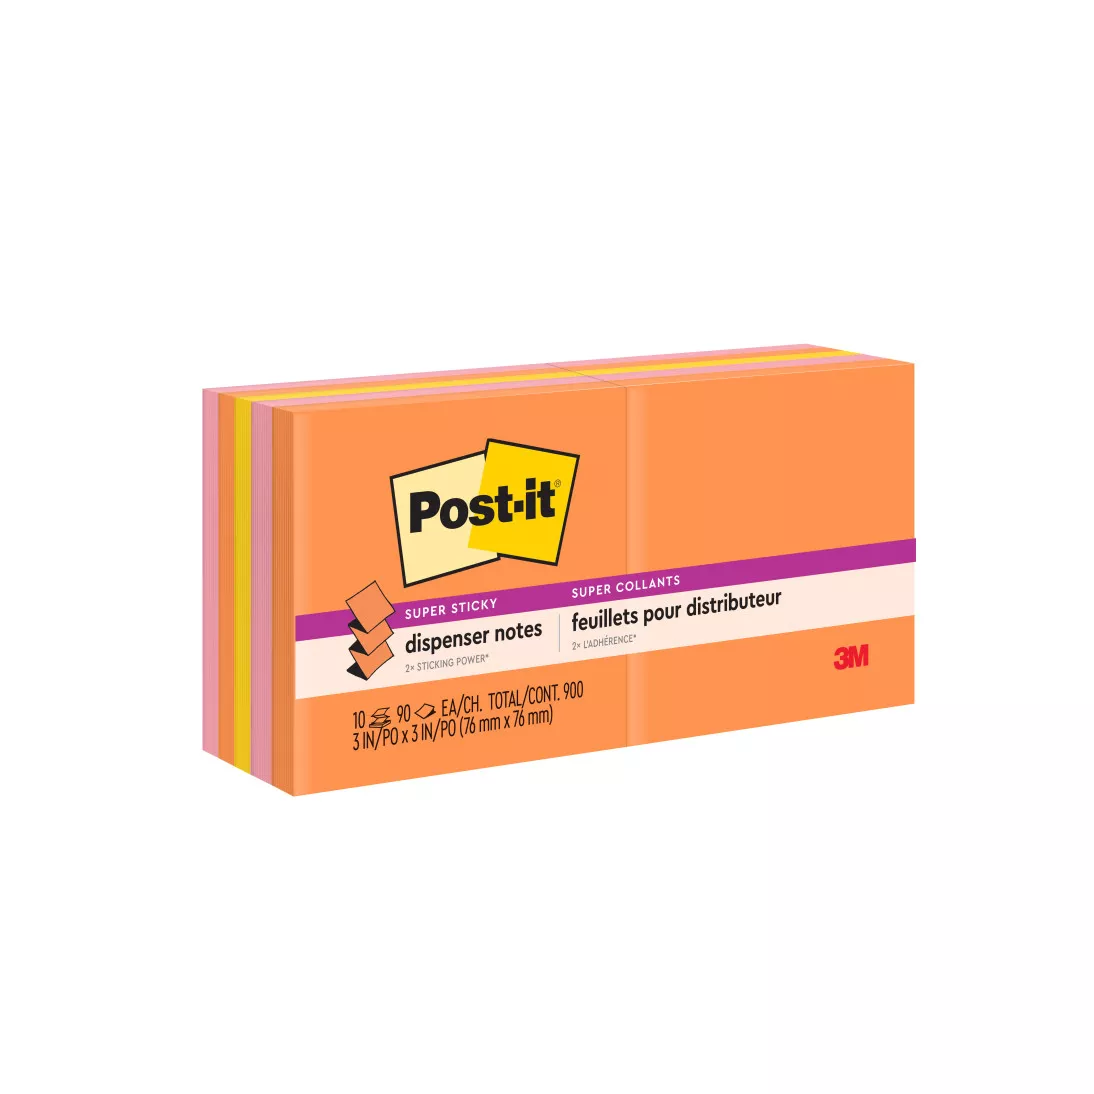 Post-it® Super Sticky Dispenser Notes R330-10SSAU, 3 in x 3 in (76 mm x 76 mm), 10 pads, 90 sheets/pad